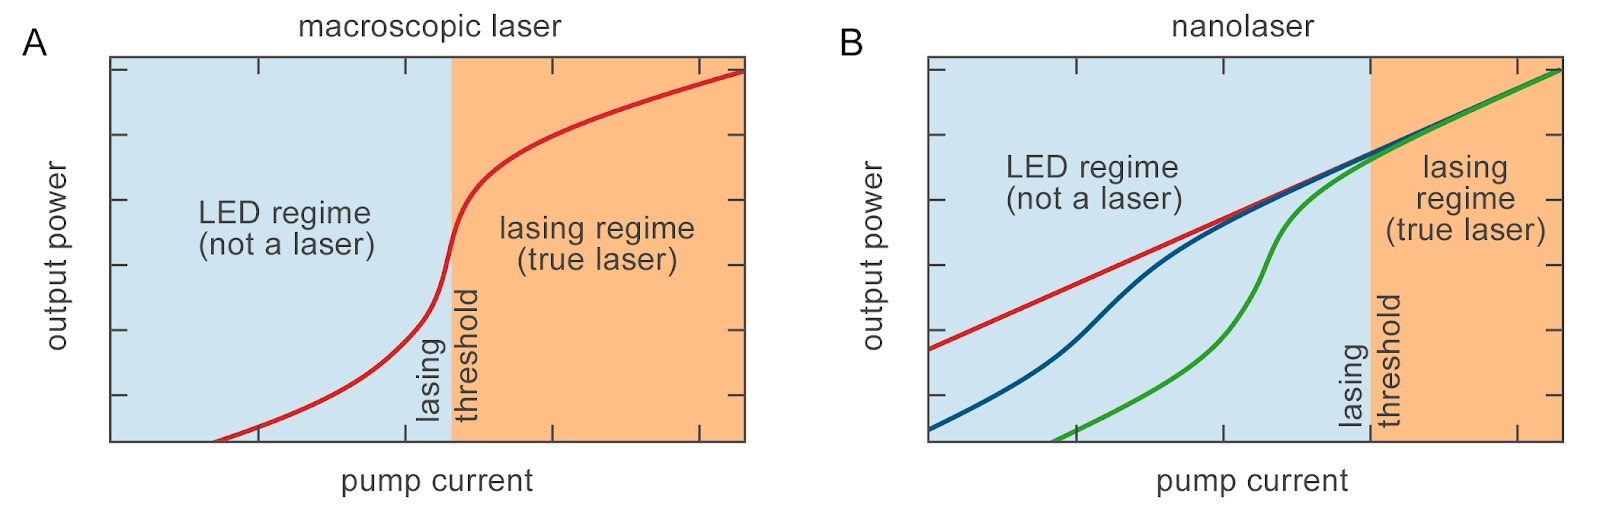 Dependence of the output power on pump current for a conventional macroscopic laser